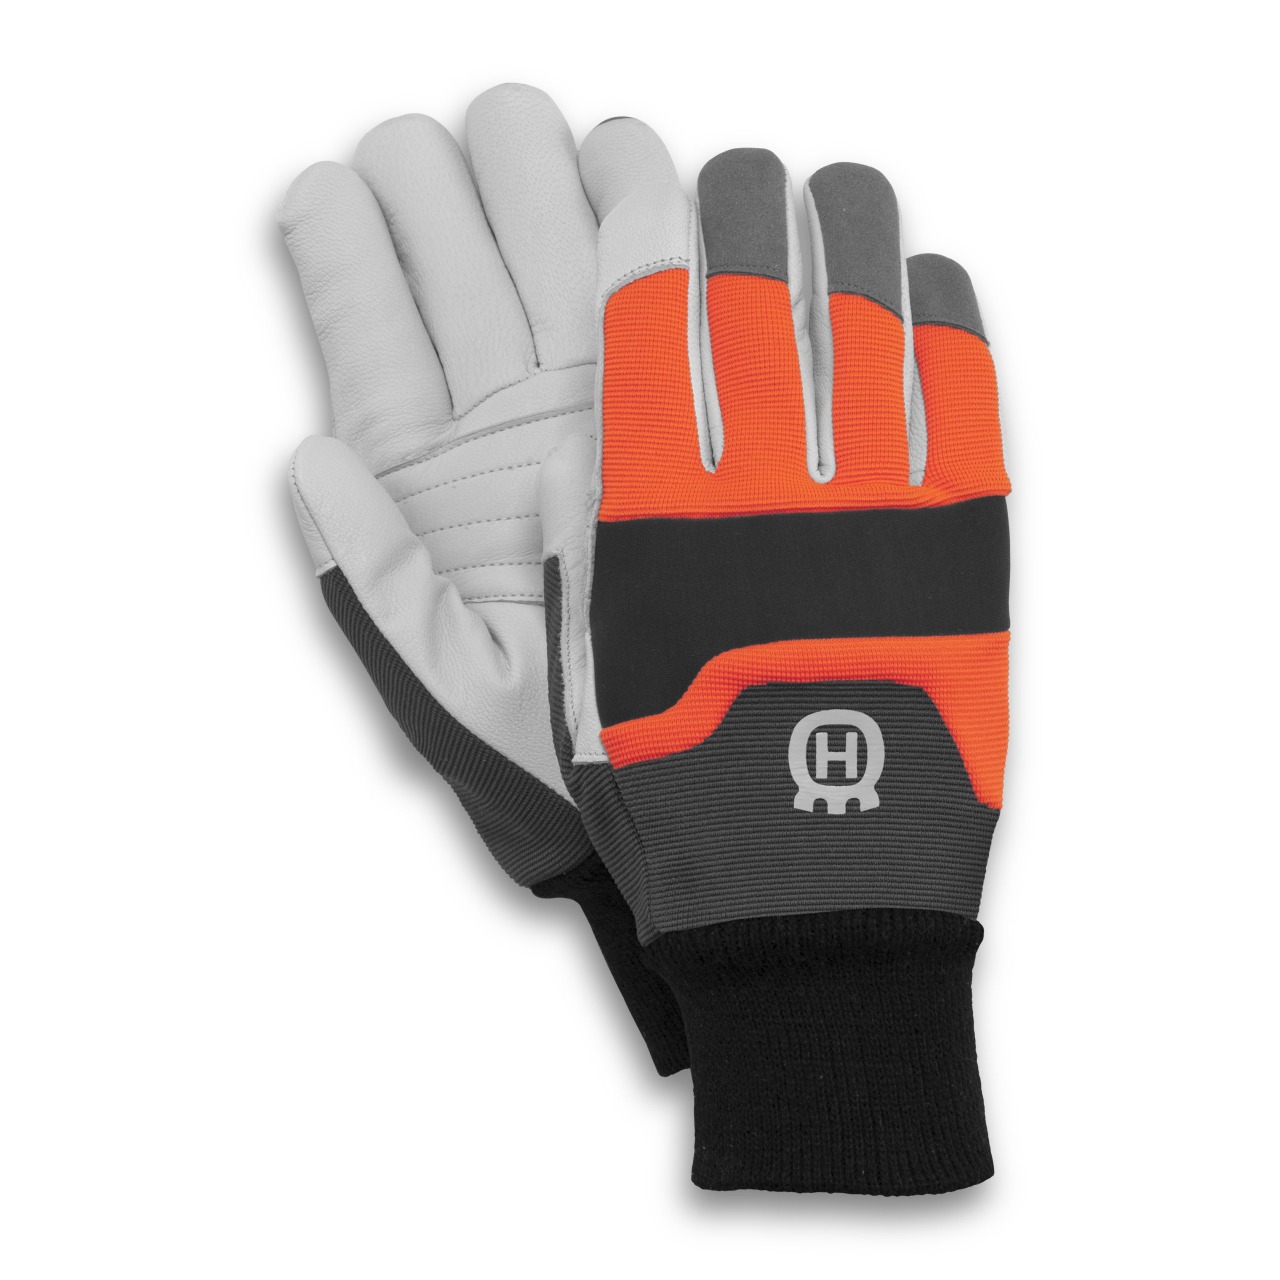 Handschuhe Functional Saw Protection